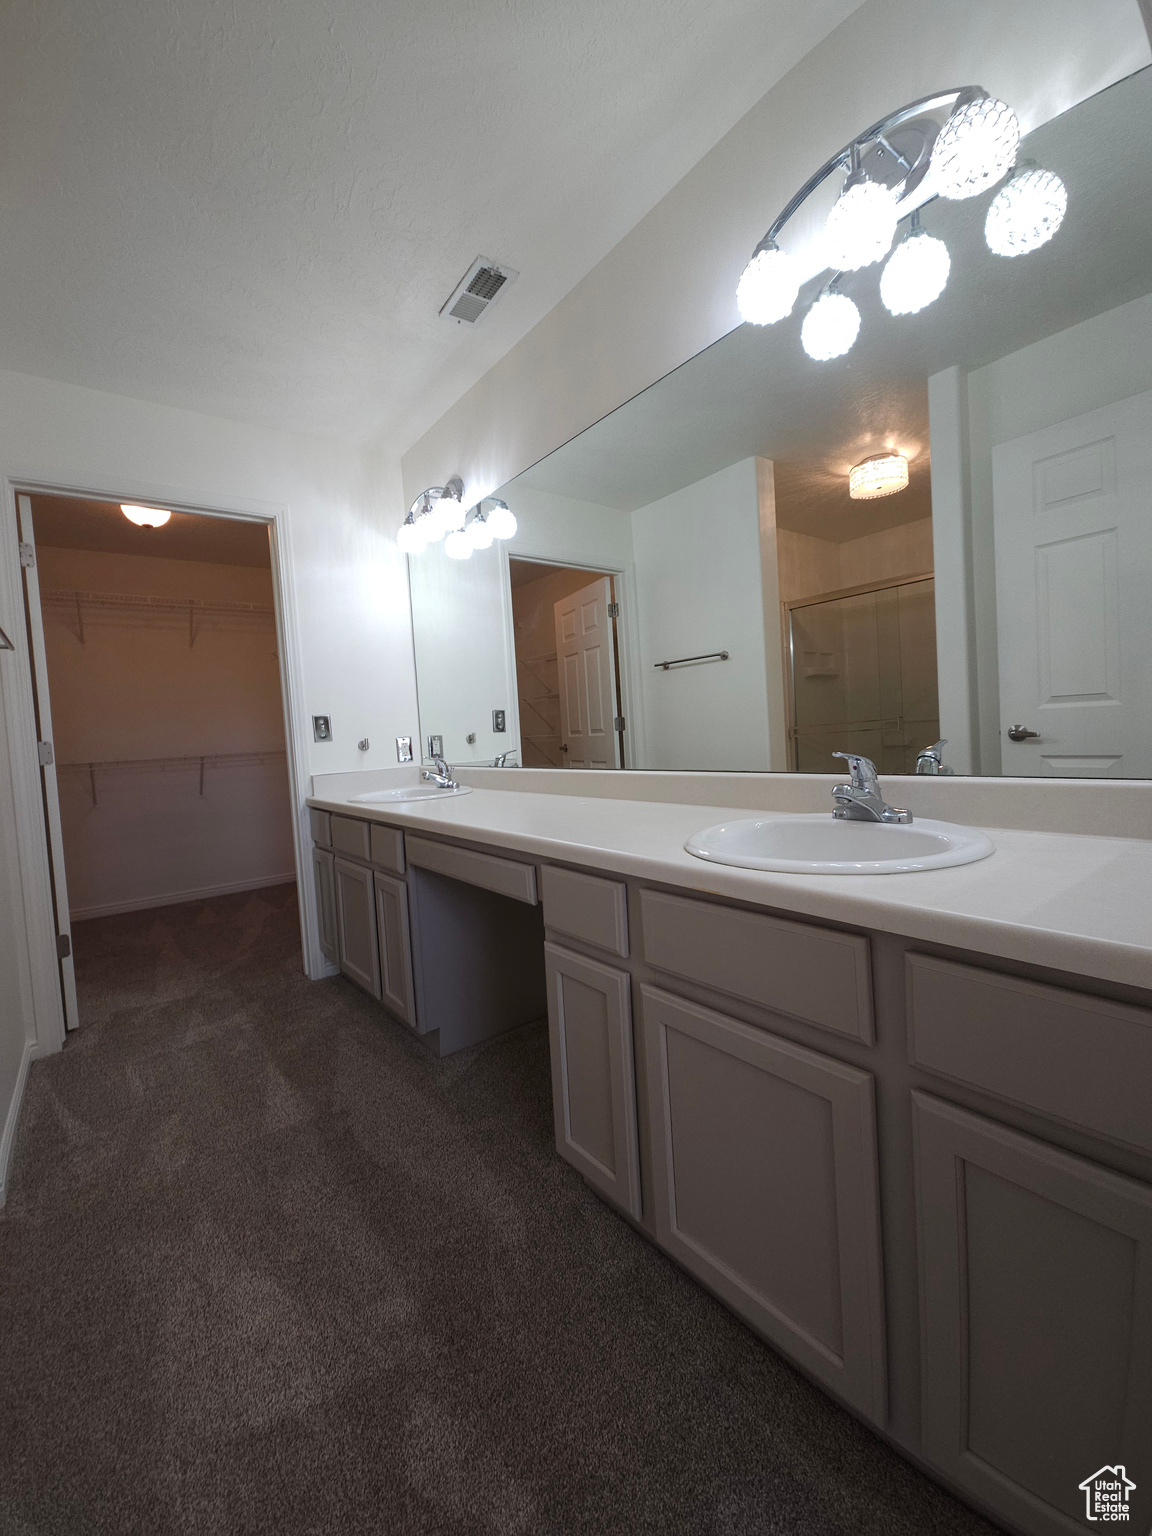 Fresh paint and new carpet, compliment this double sink with makeup vanity grooming area